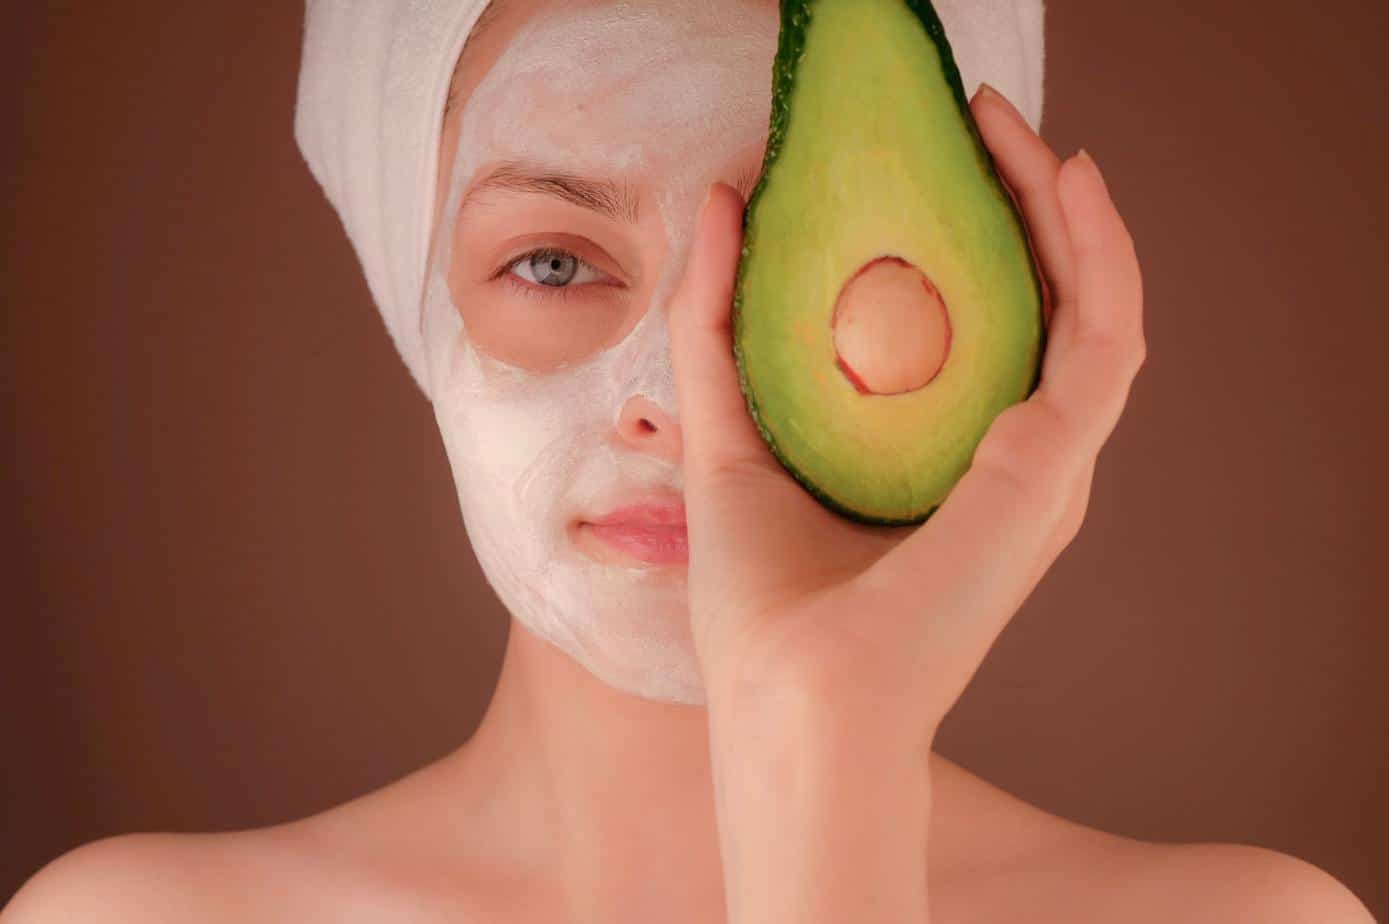 How to take care of your skin? Reach for homemade face masks